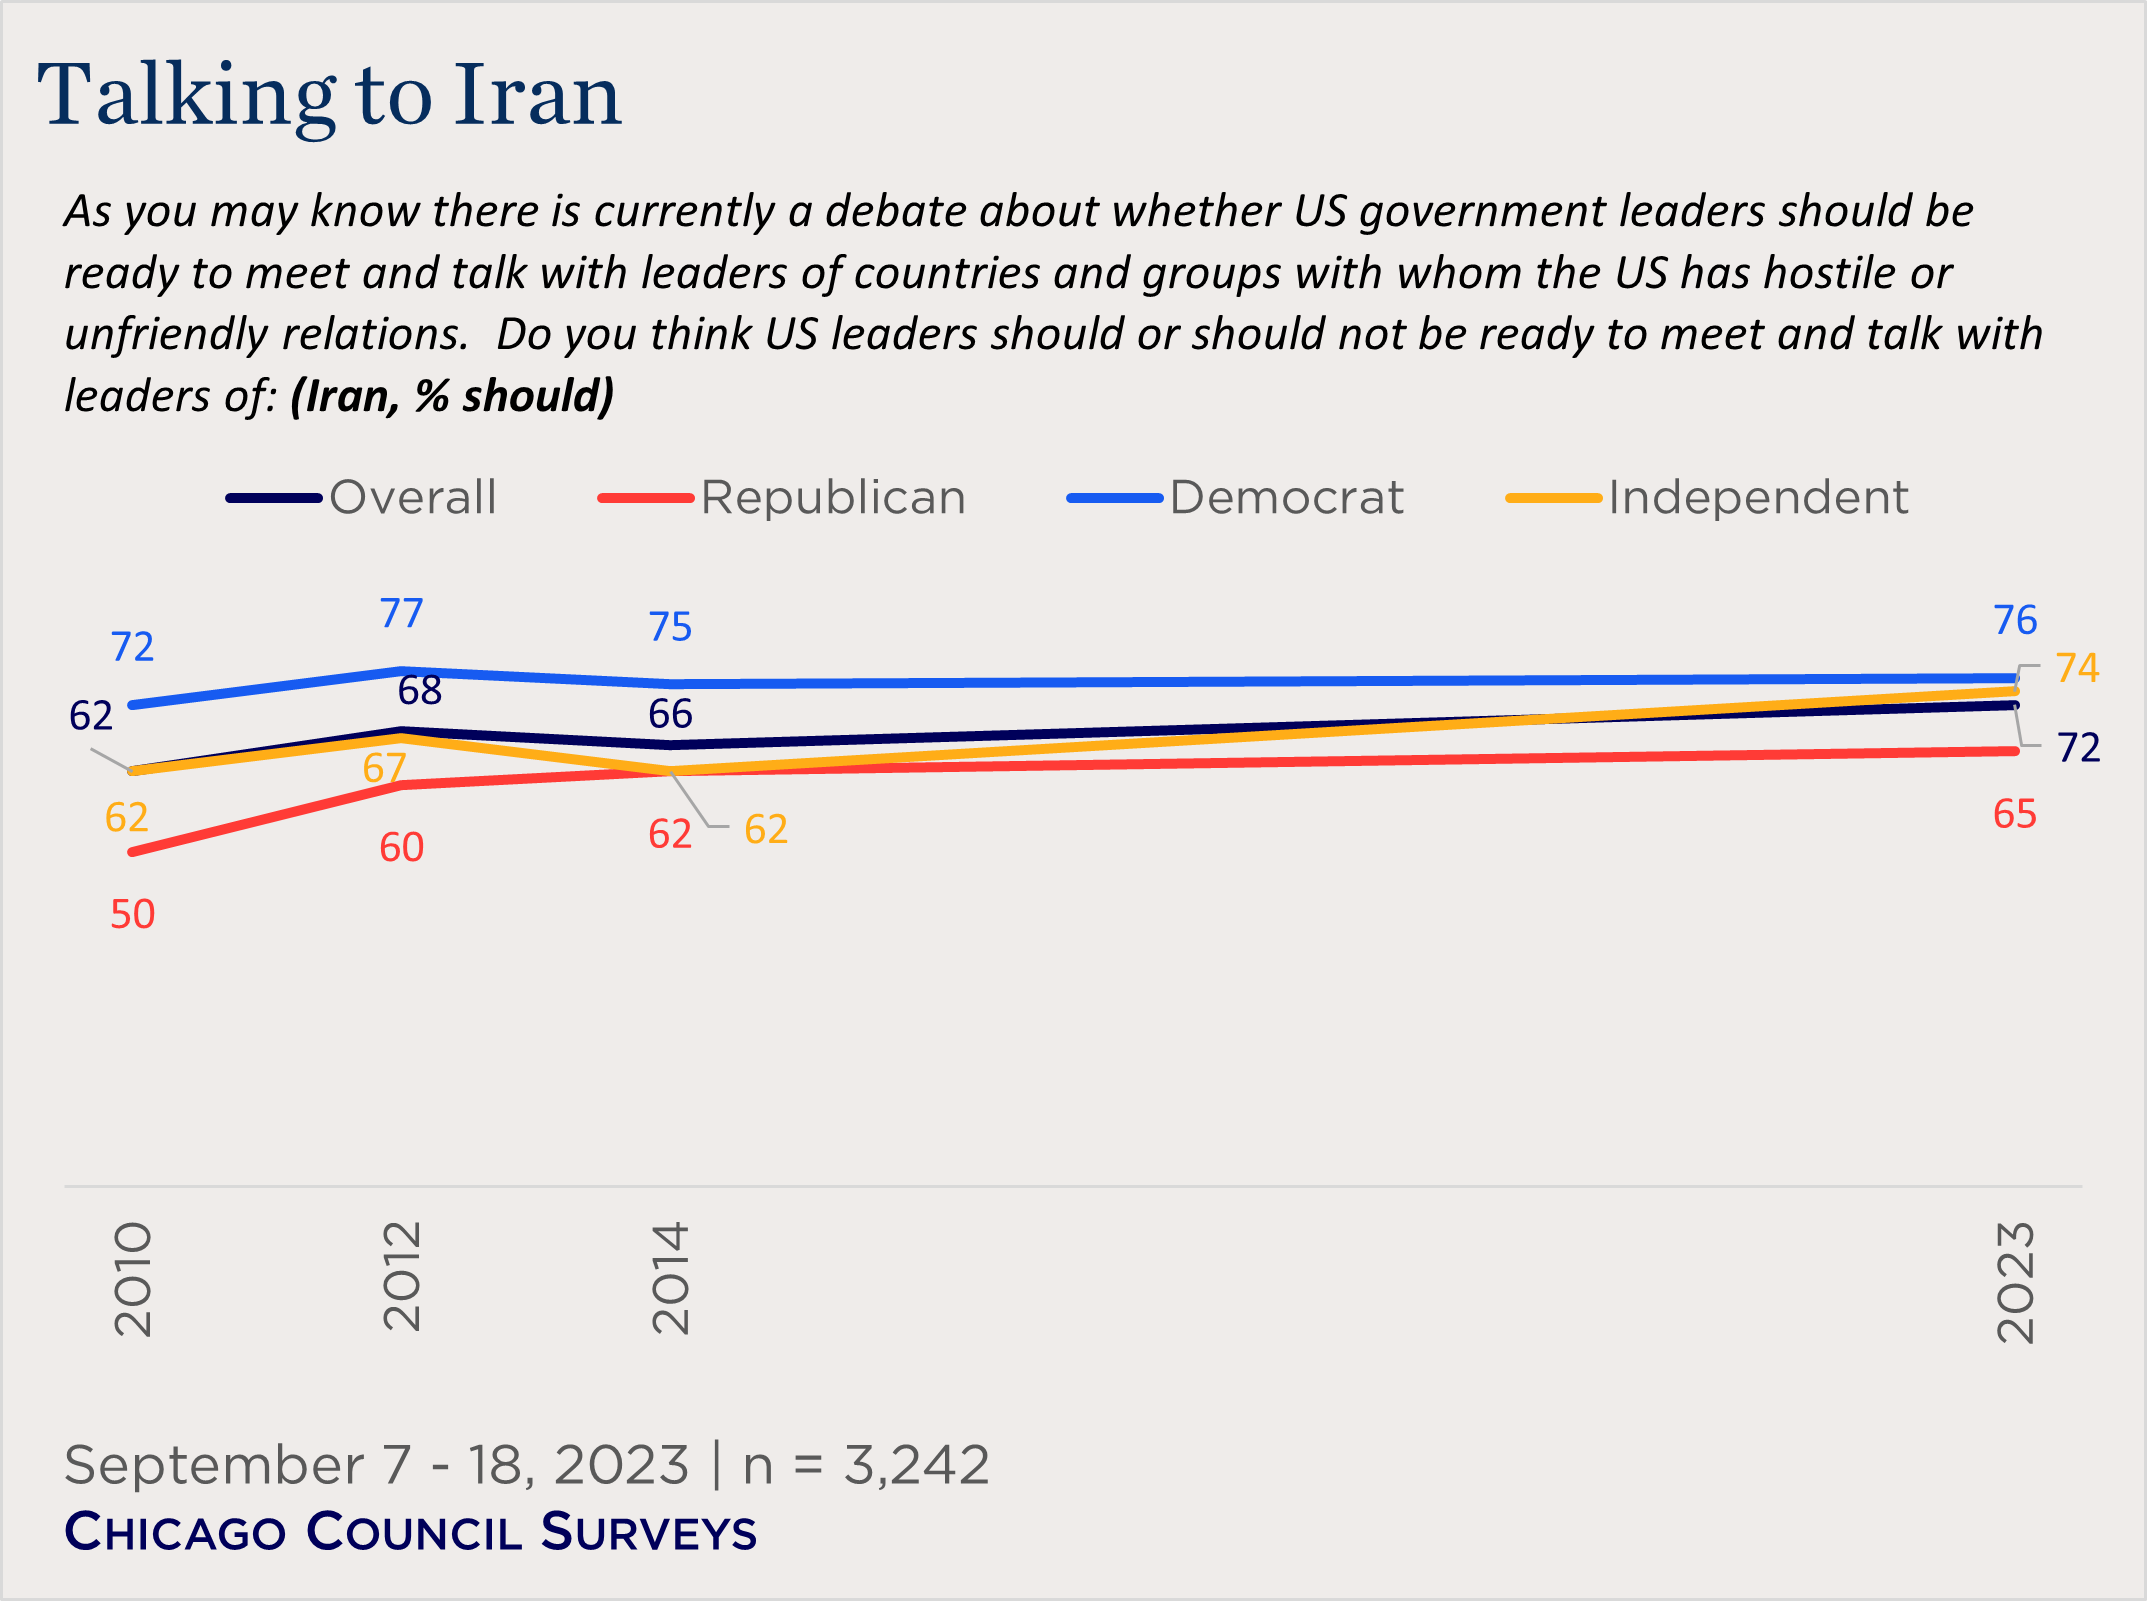 "line chart showing partisan views on talking to Iran over time"